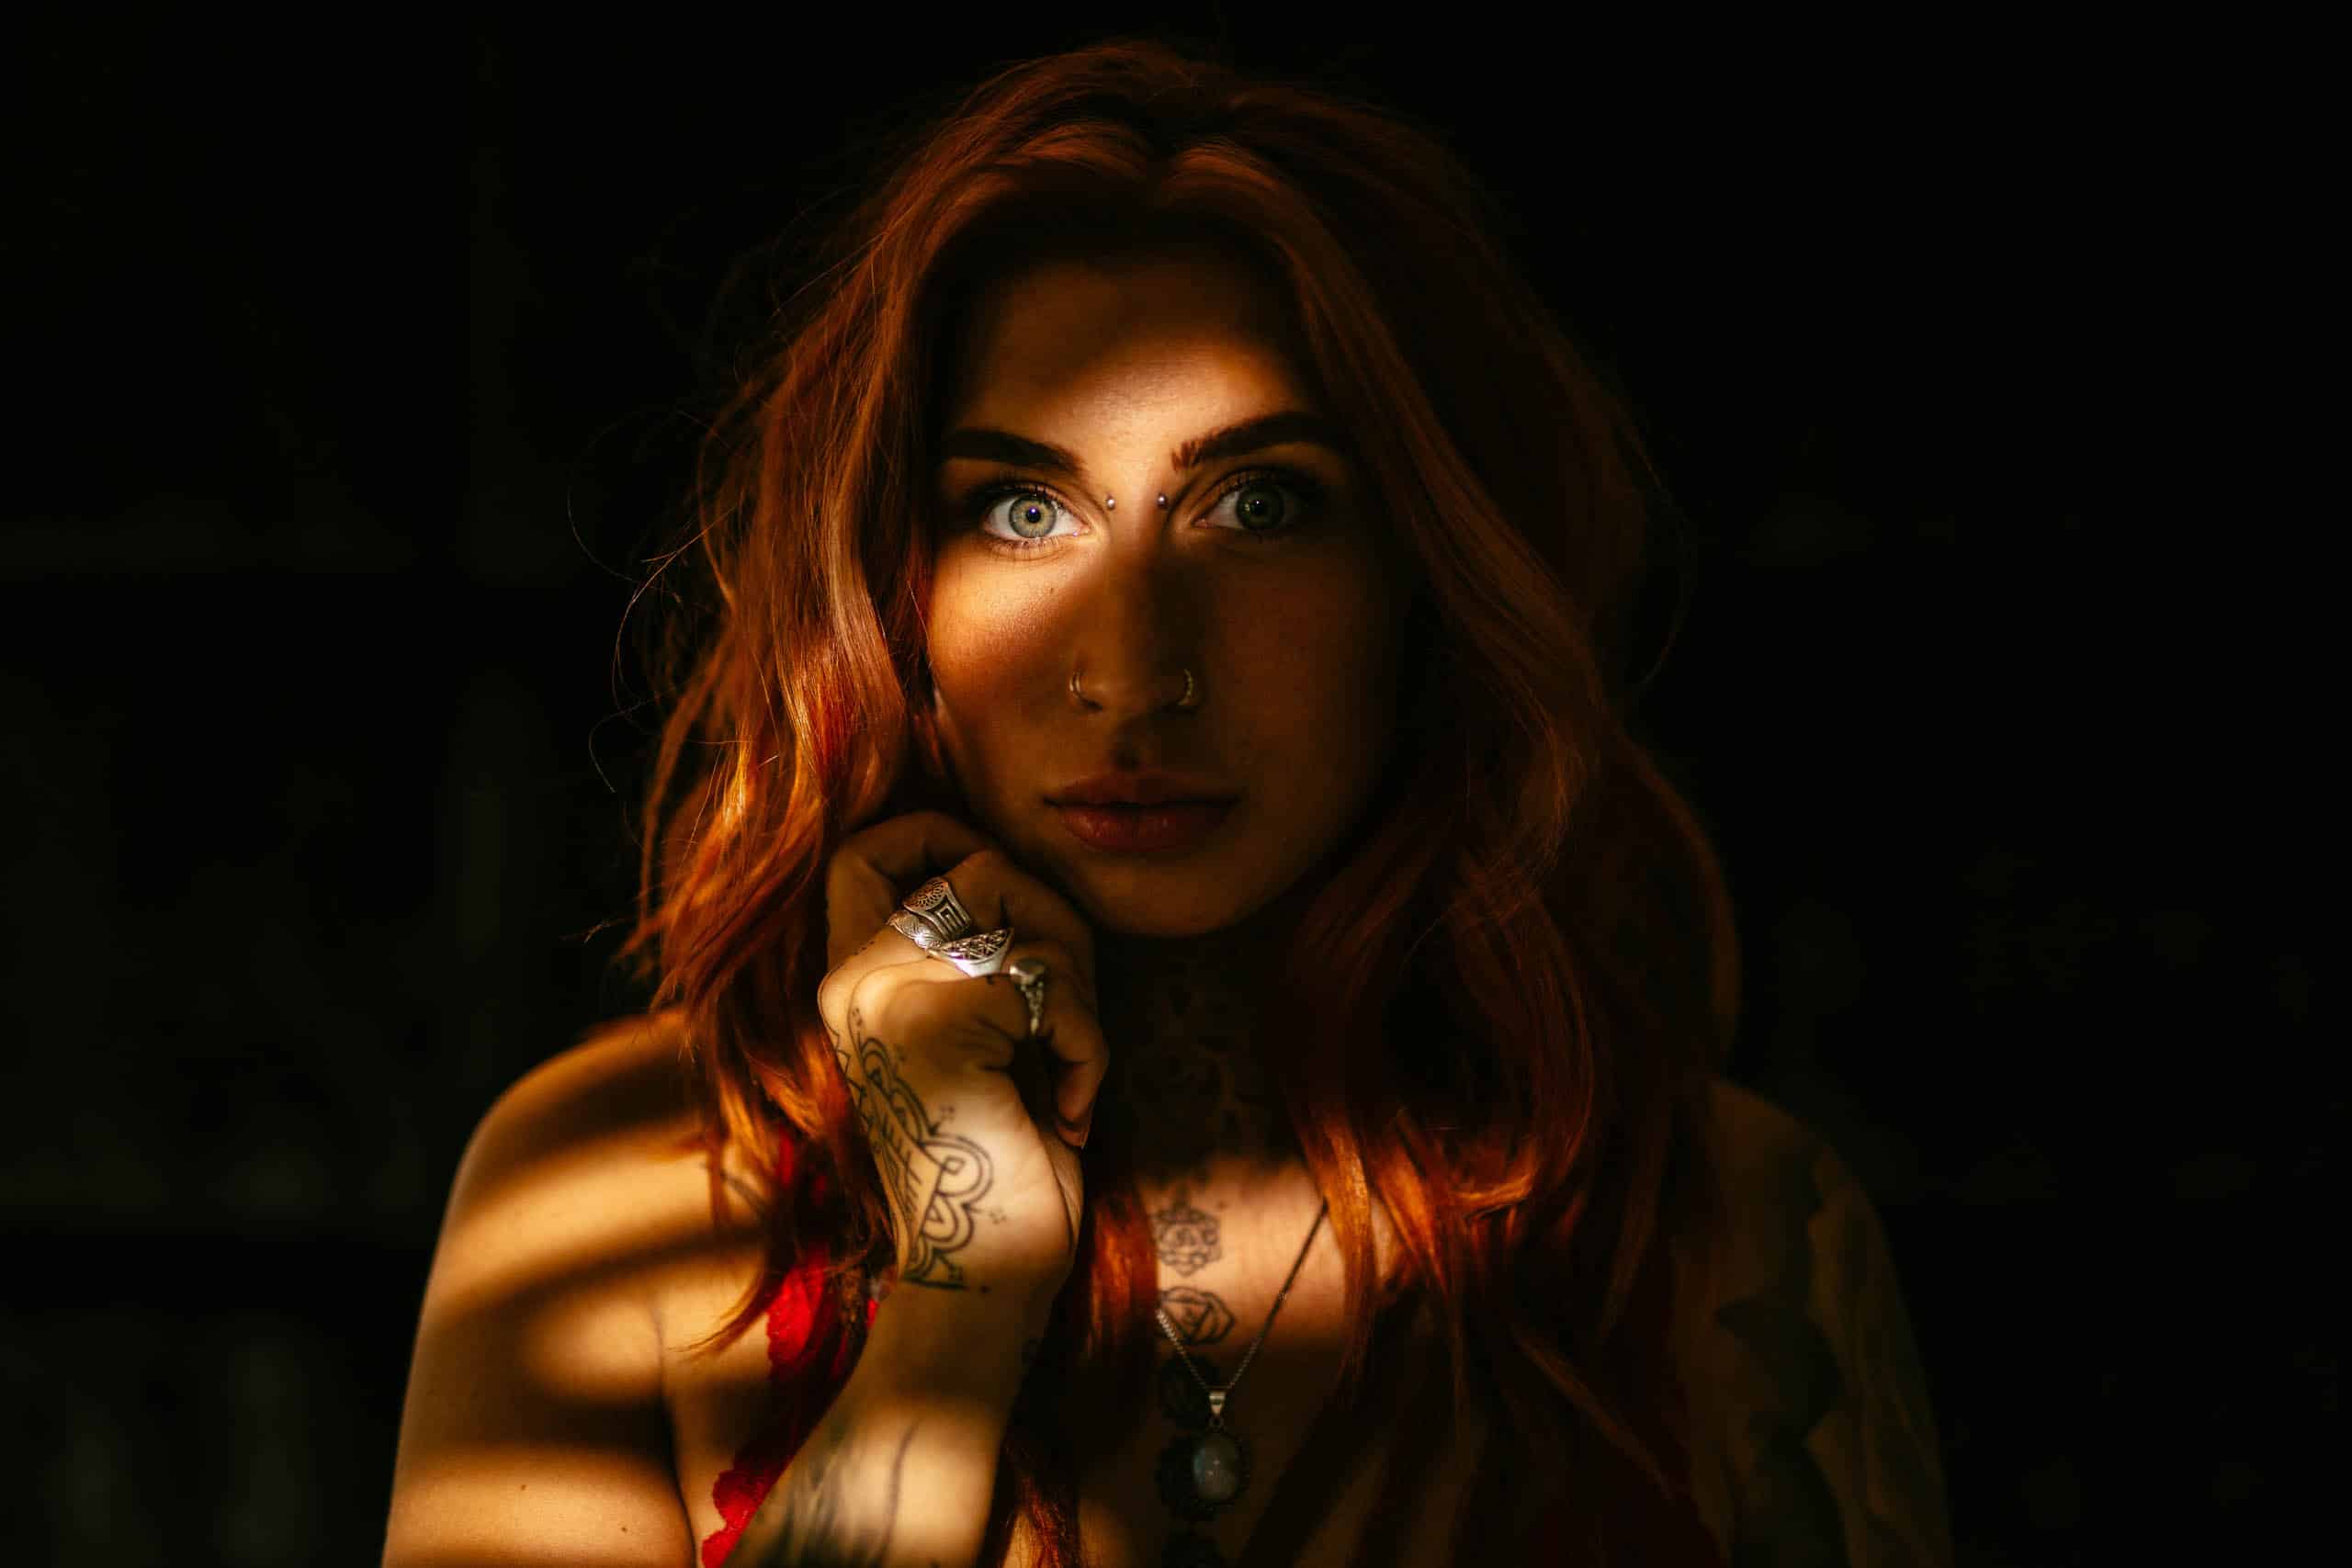 A woman with red hair and tattoos poses in a dark room during a boudoir shoot in Hoek van Holland.